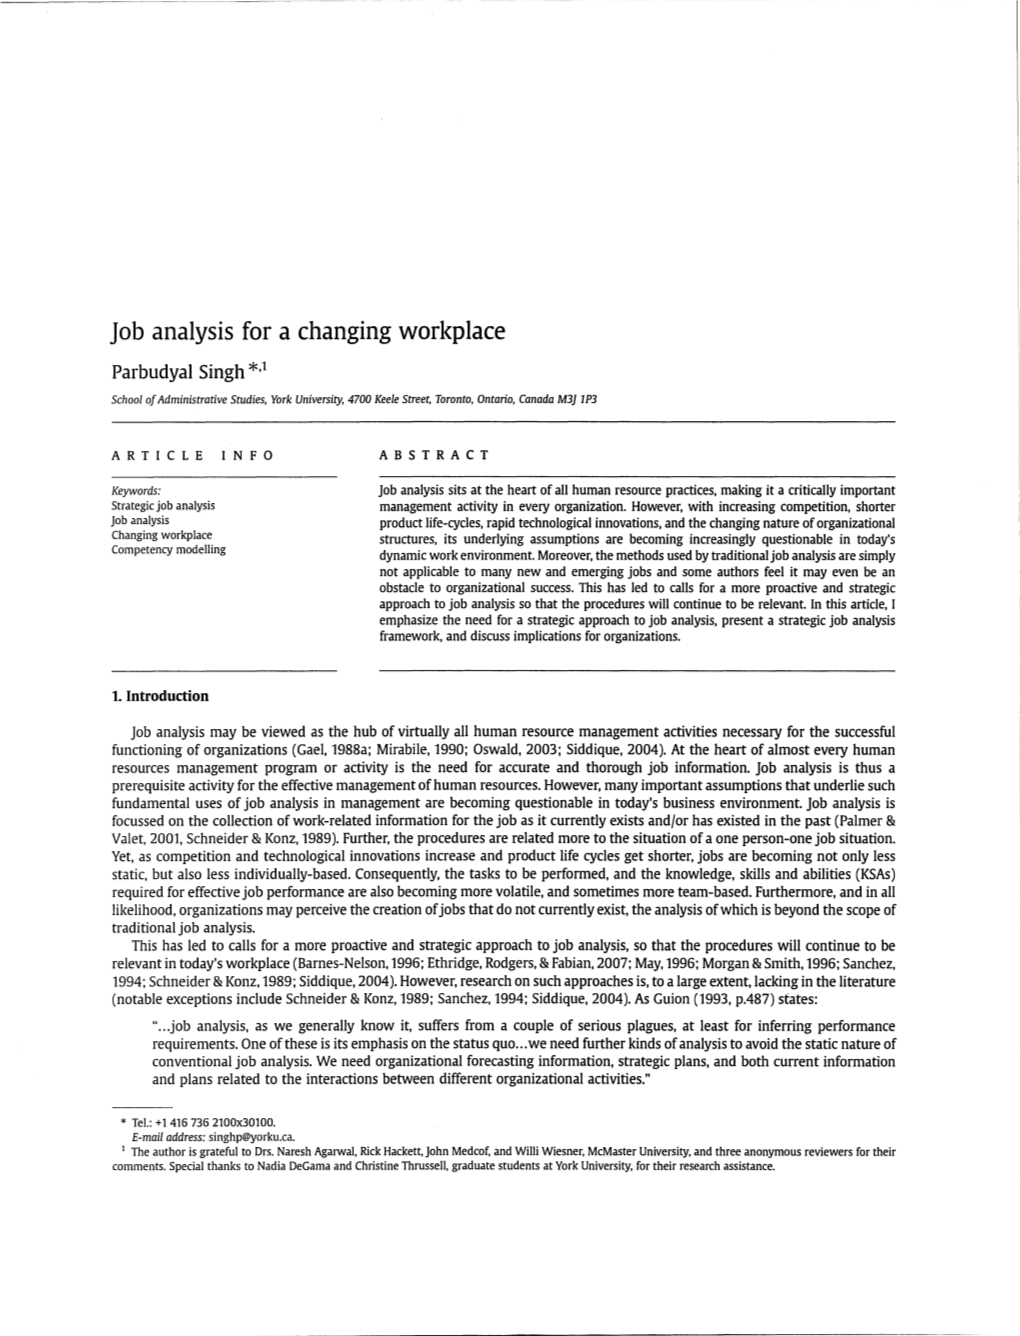 Job Analysis for a Changing Workplace